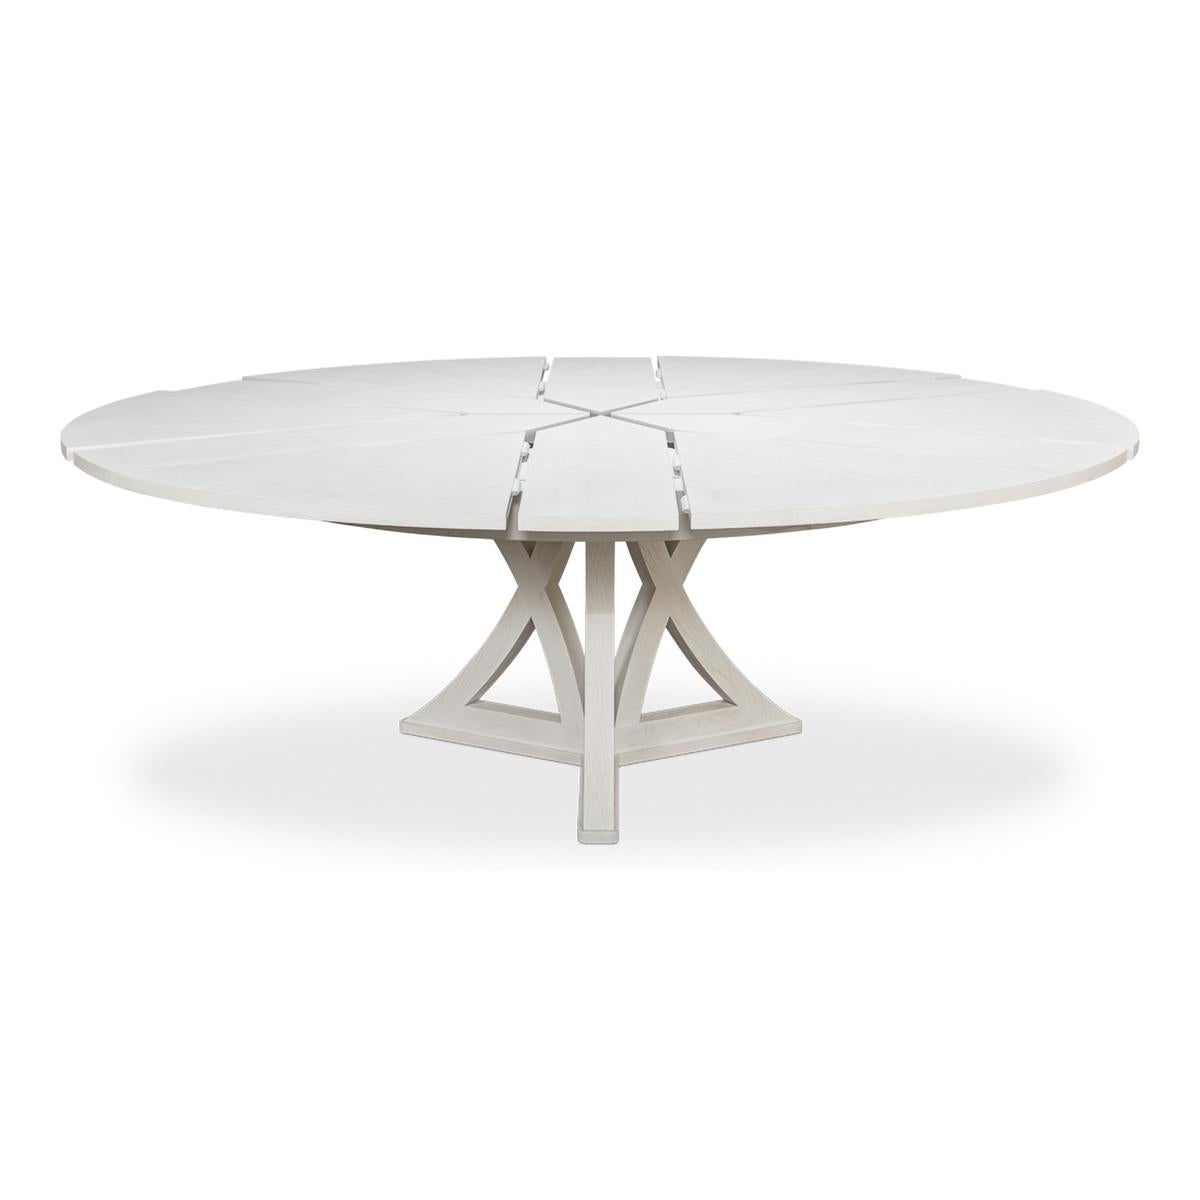 Contemporary Rustic Round Dining Table, Working White For Sale